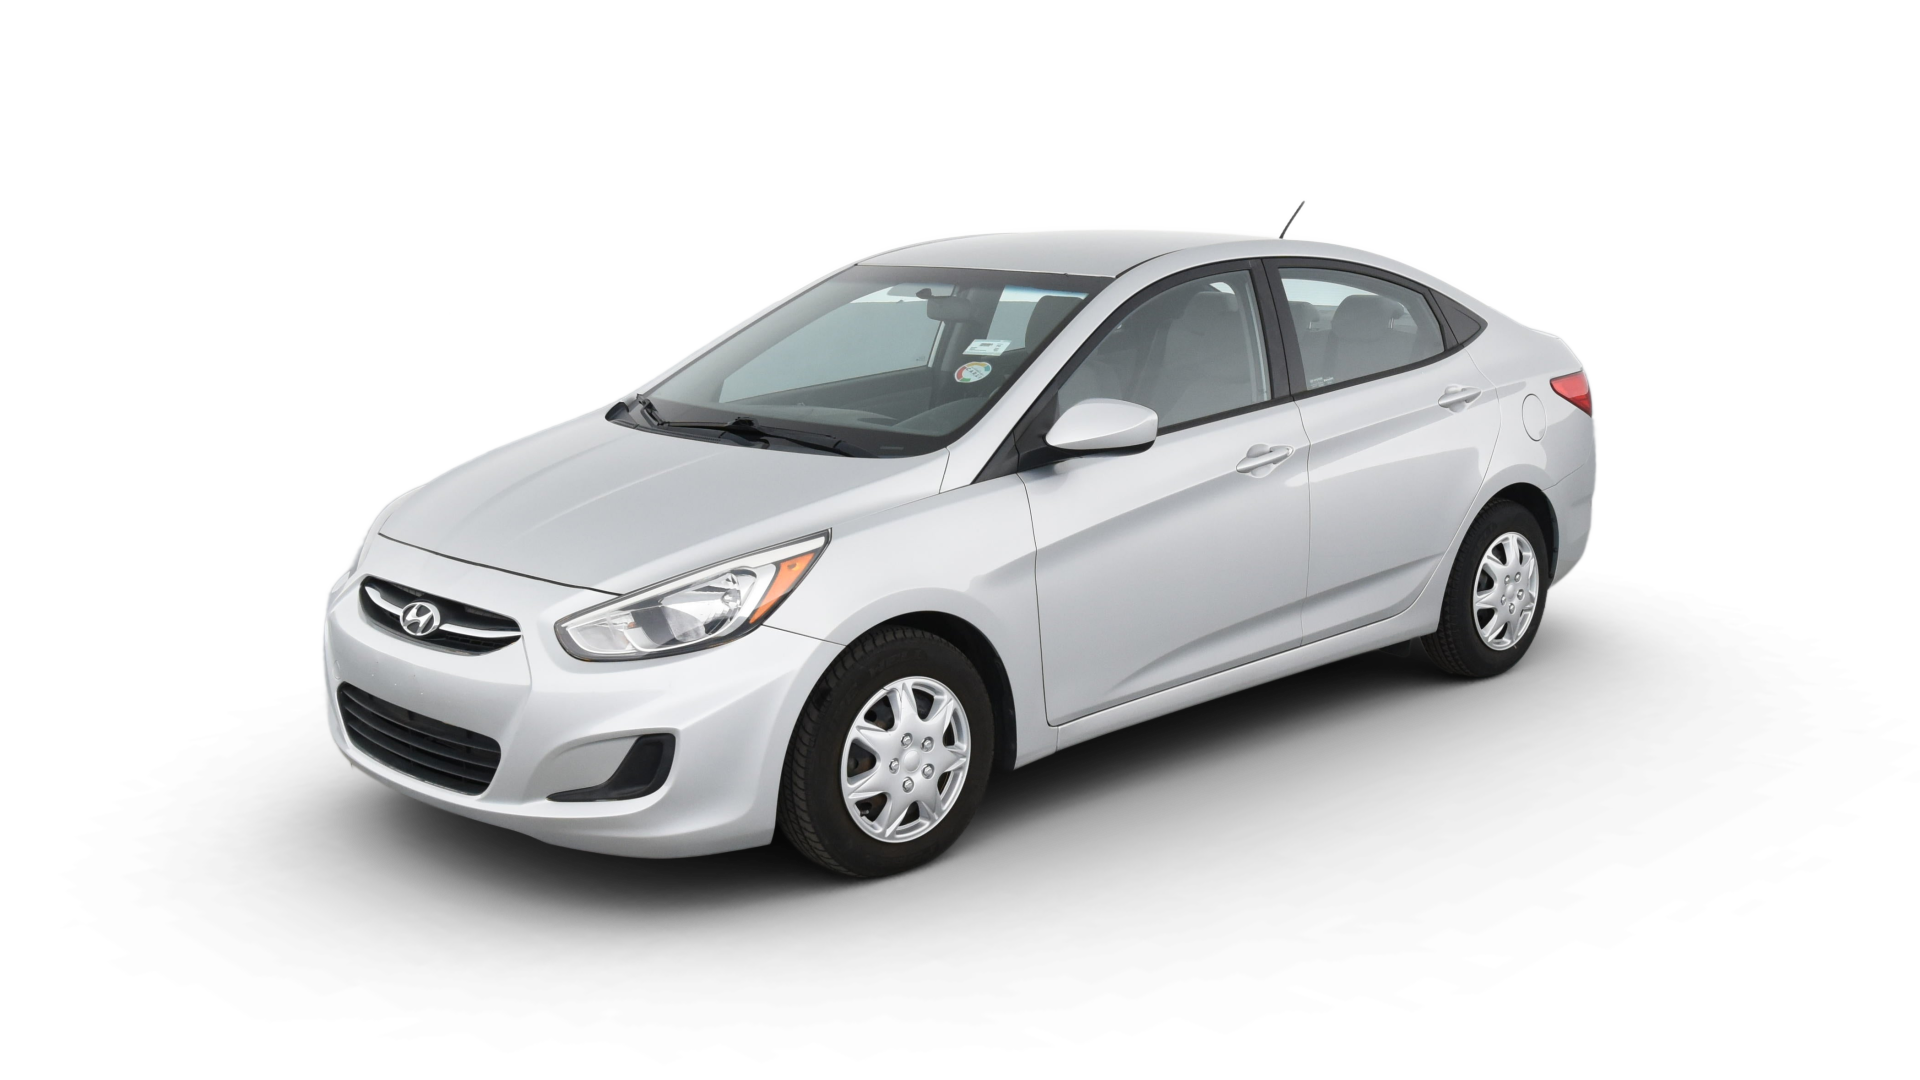 Used 2015 Hyundai Accent For Sale Online | Carvana